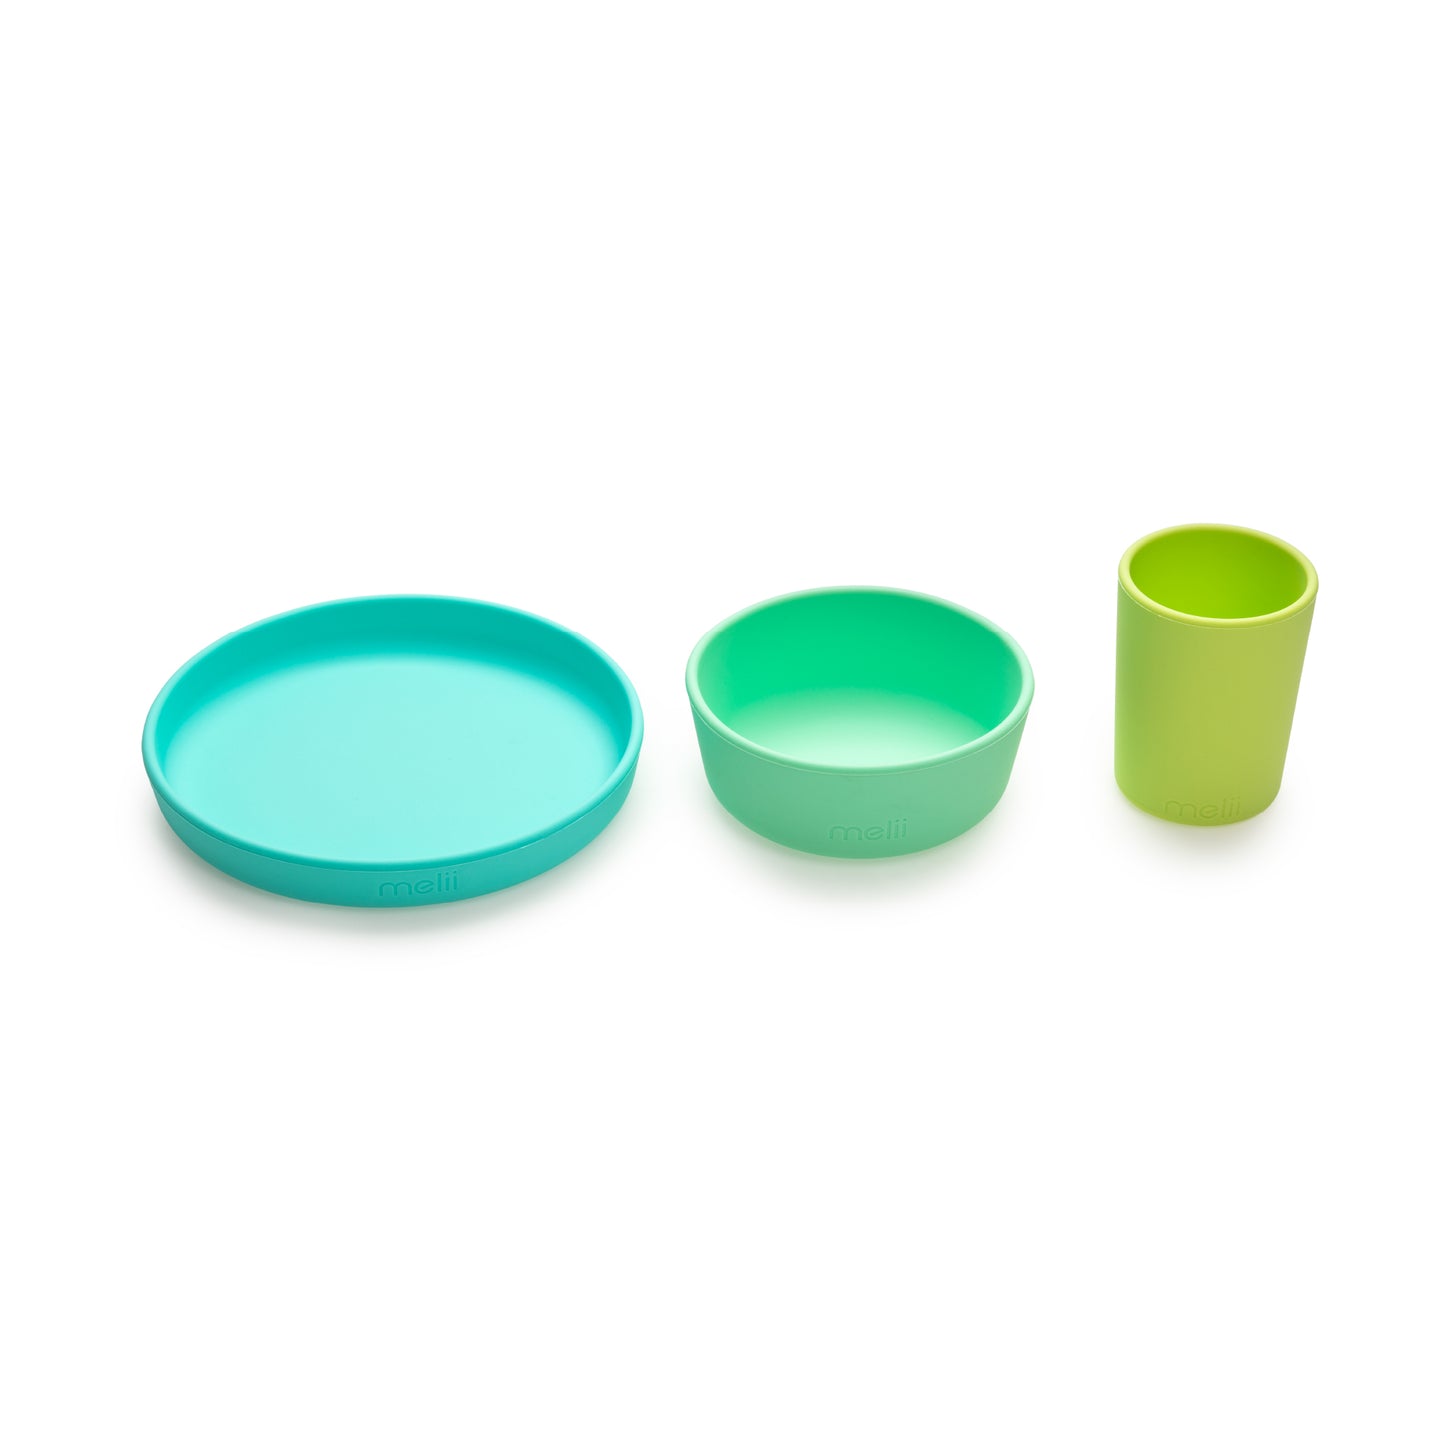 Melii 3-Piece Silicone Meal Set - Colorful, Durable, and Safe Dinnerware for Babies, Toddlers, and Kids - BPA-Free, Microwave Safe, Easy-Clean Dish Set